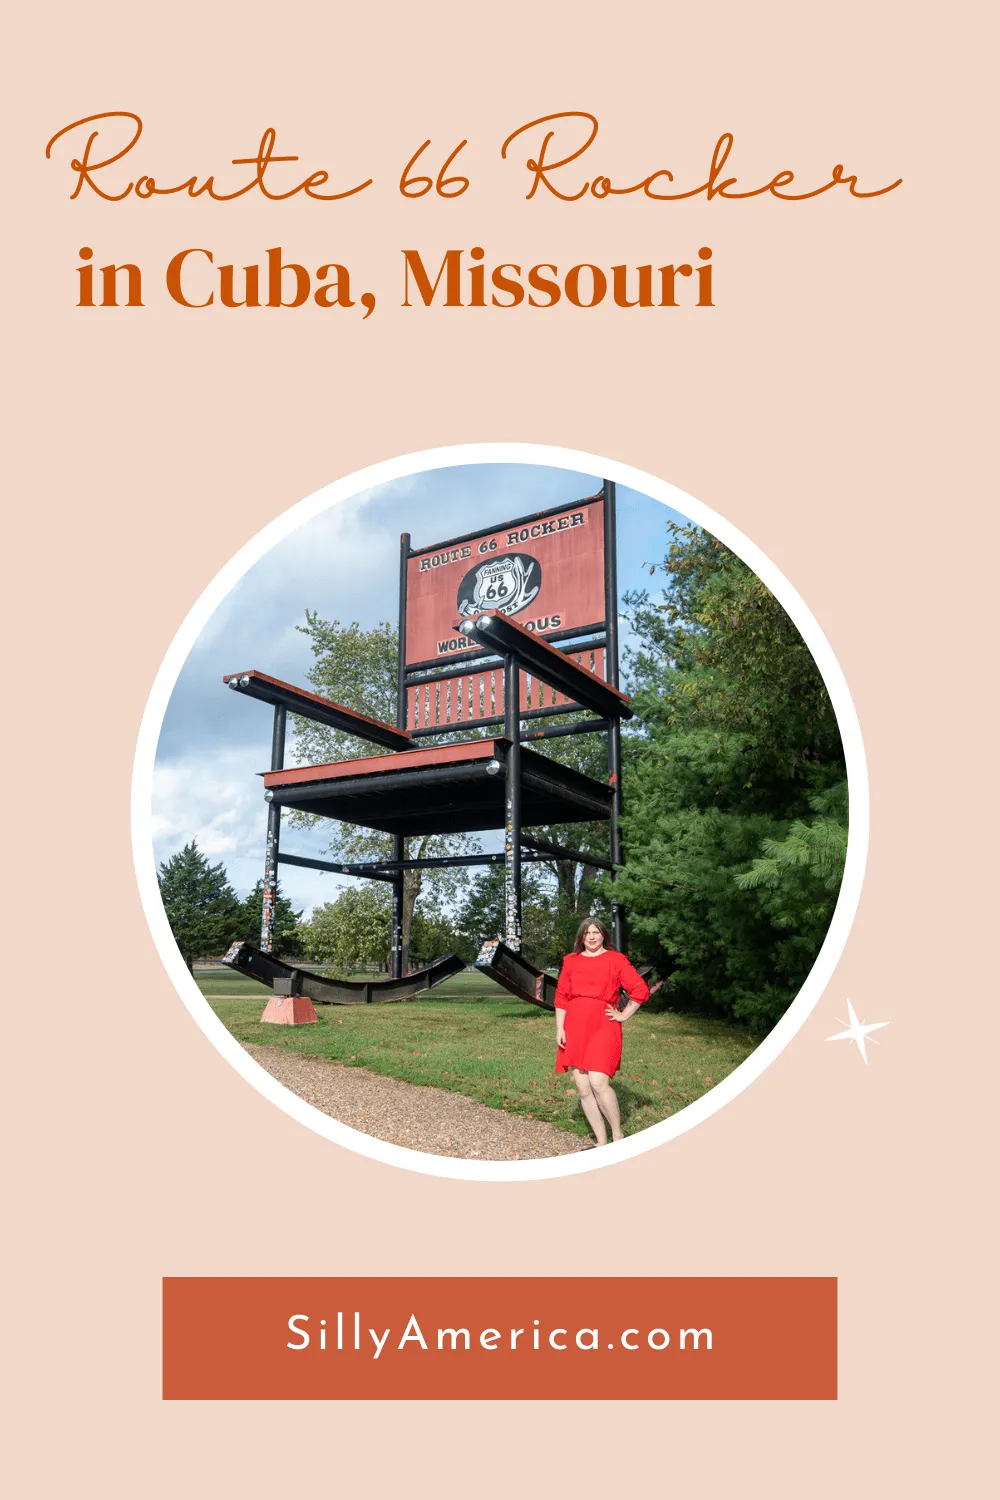 Whoever came up with this Missouri roadside attraction must have been off their rocker! In 2008, the World’s Largest Rocking Chair was erected on historic Route 66 outside the Fanning Outpost General Store in Cuba, Missouri. It is now known as the Route 66 Rocker — and this big chair still rocks! #RoadTrips #RoadTripStop #Route66 #Route66RoadTrip #MissouriRoute66 #Missouri #MissouriRoadTrip #MissouriRoadsideAttractions #RoadsideAttractions #RoadsideAttraction #RoadsideAmerica #RoadTrip